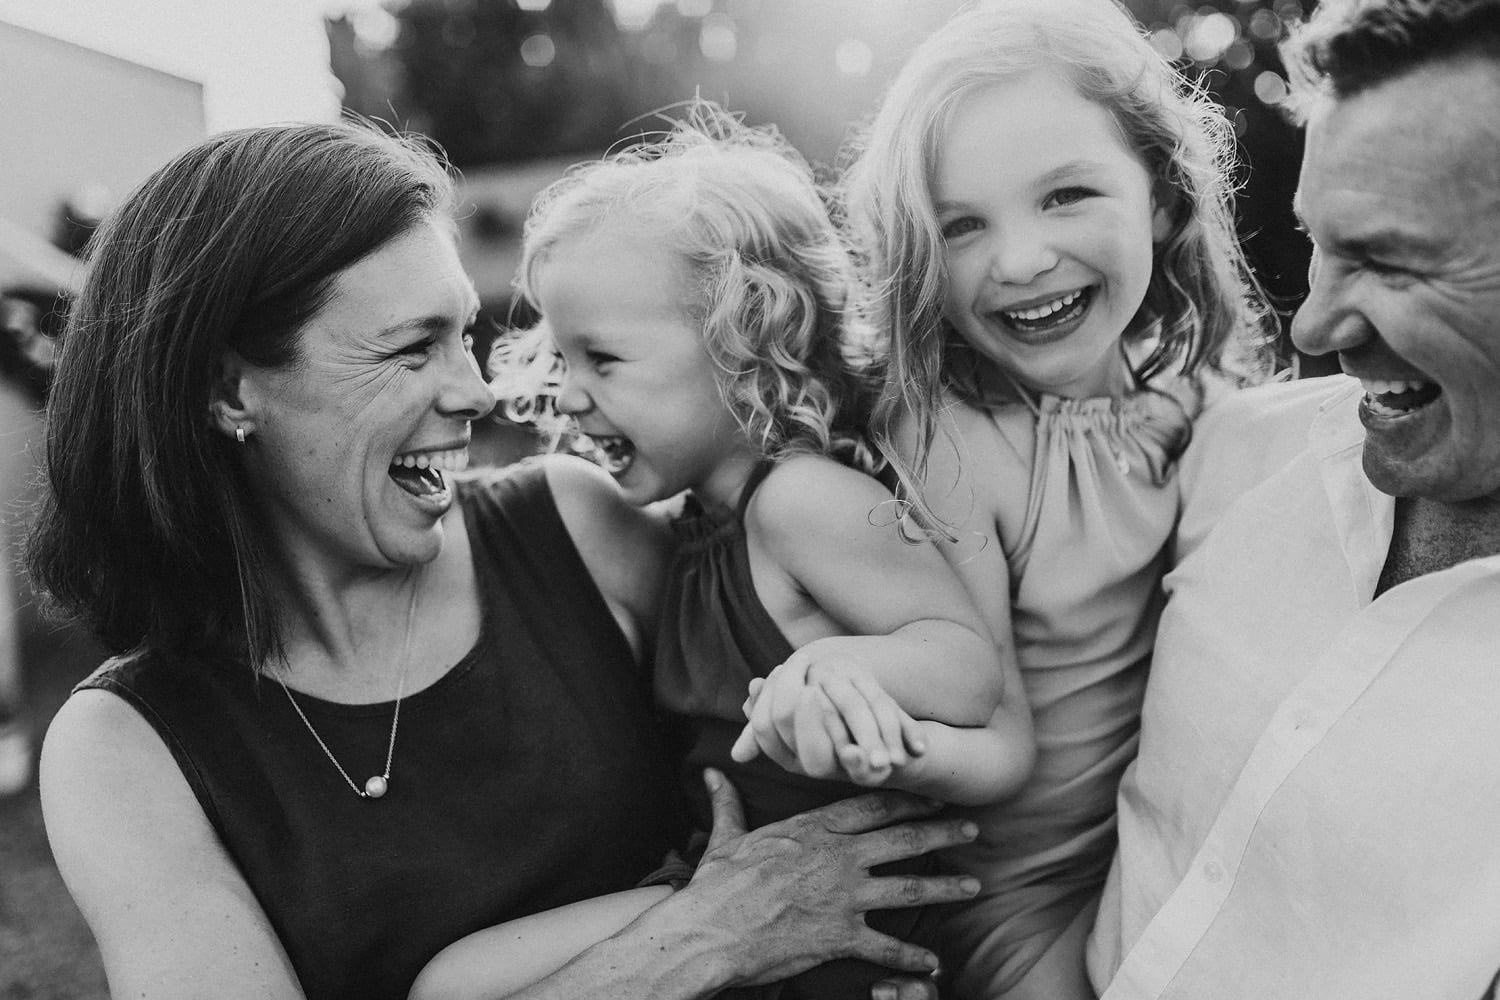 Natural-family-moments-photography-sydney-sutherland-shire